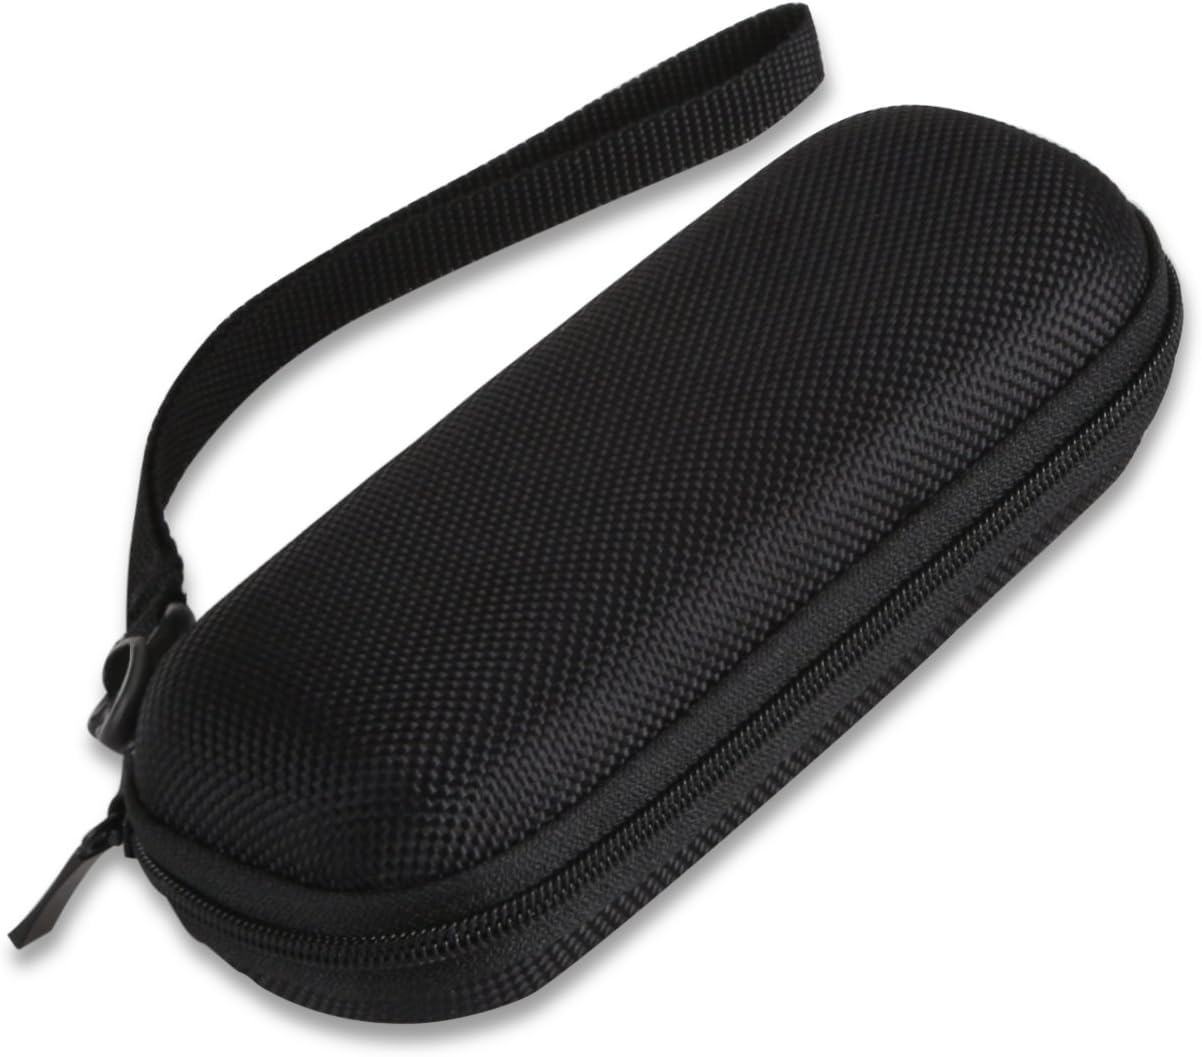 AGPTEK Carrying Case, EVA Zipper Carrying Hard Case Cover for Digital Voice Recorders, MP3 Players, USB Cable, Earphones-Bose QC20, Memory Cards, U Disk